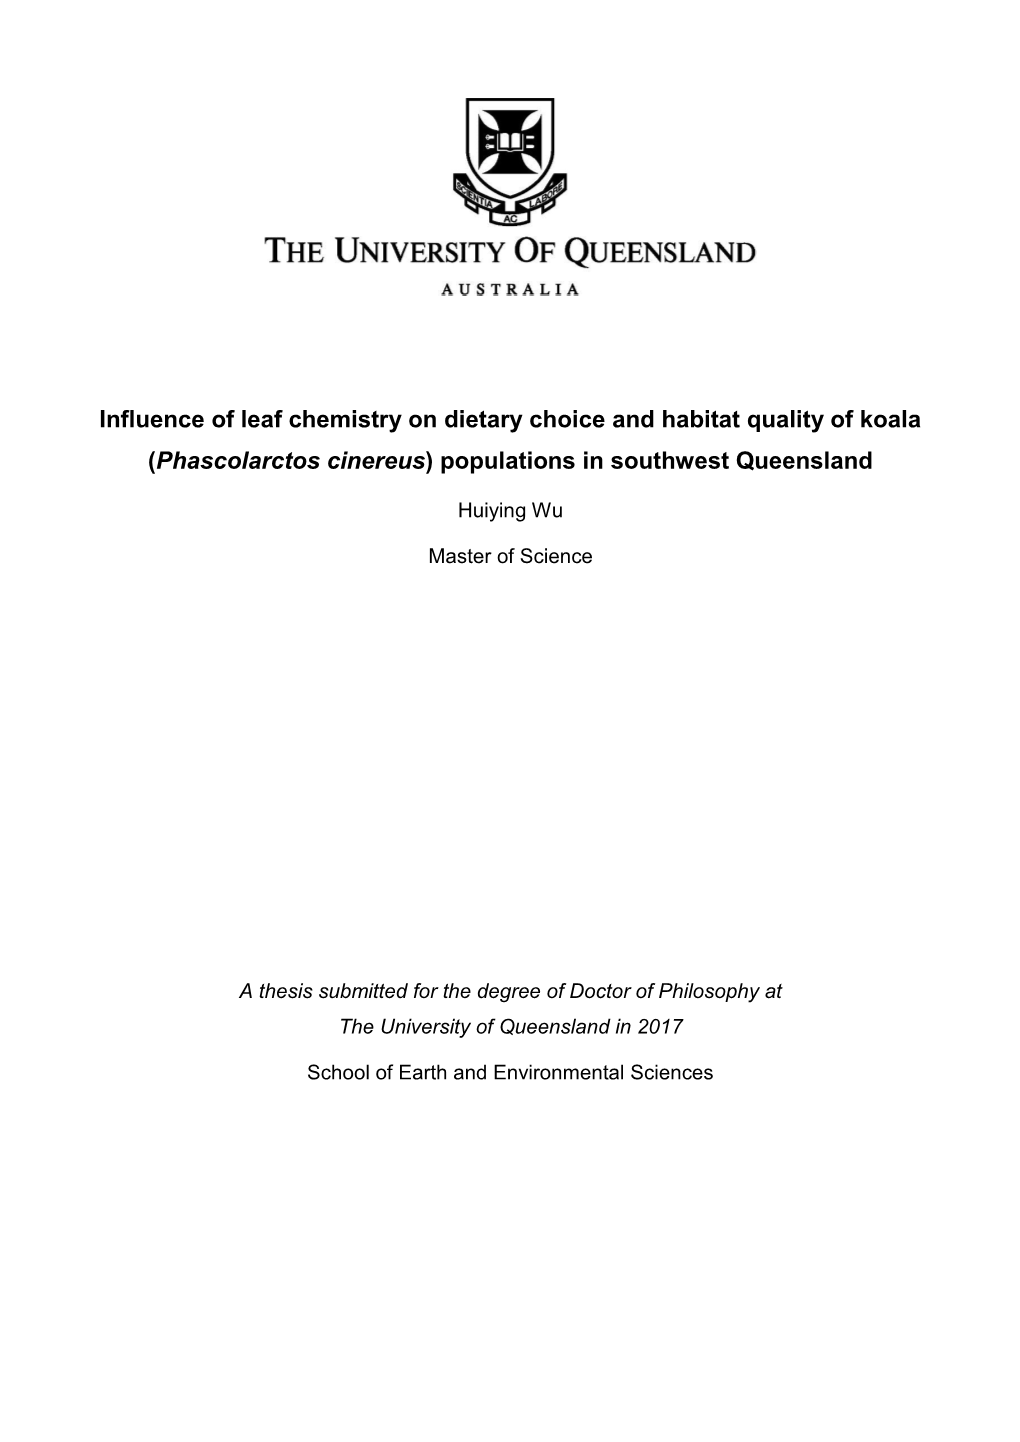 Influence of Leaf Chemistry on Dietary Choice and Habitat Quality of Koala (Phascolarctos Cinereus) Populations in Southwest Queensland